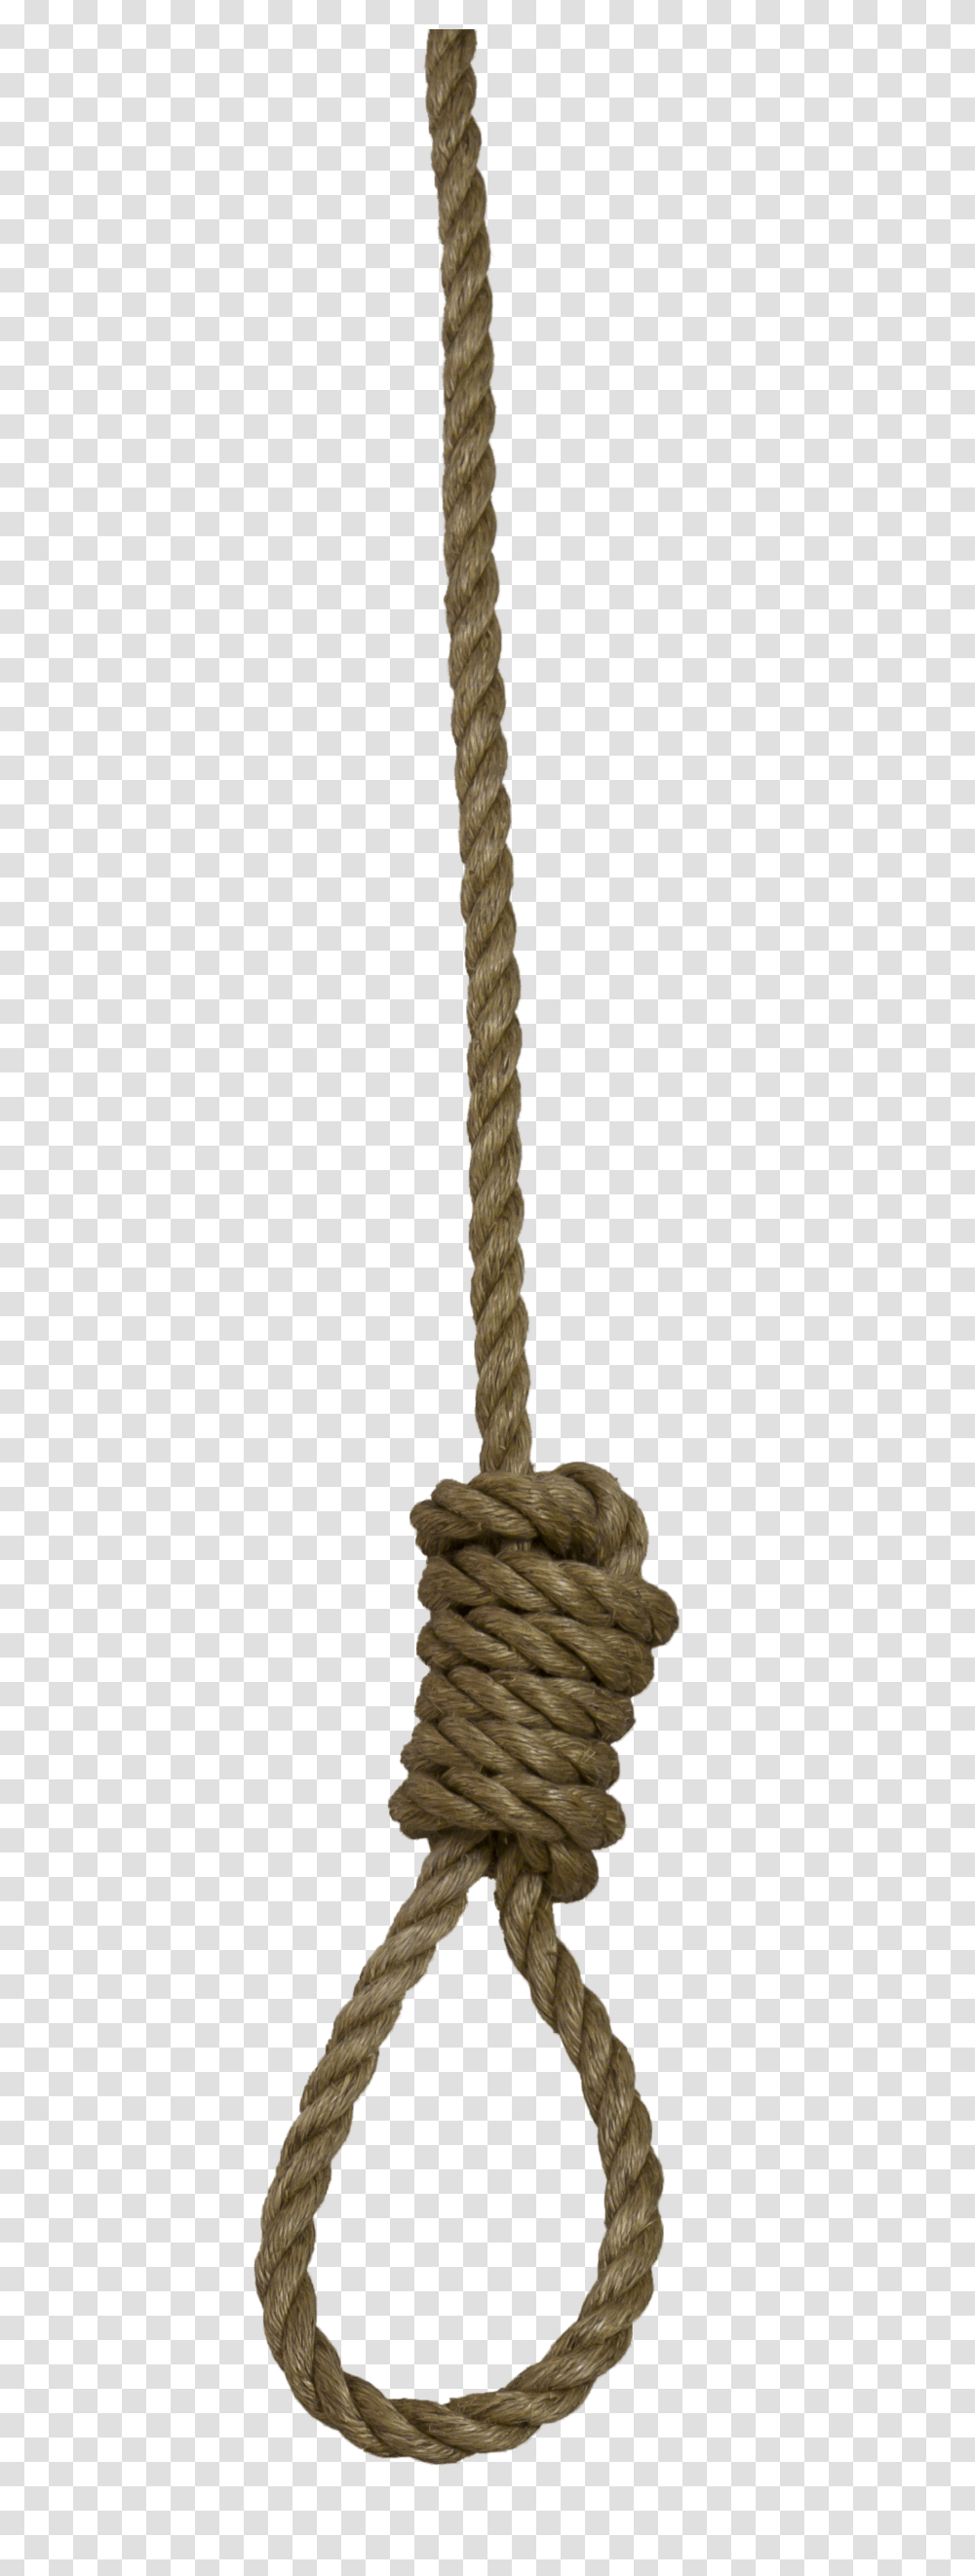 Rope Images Free Download, Knot Transparent Png